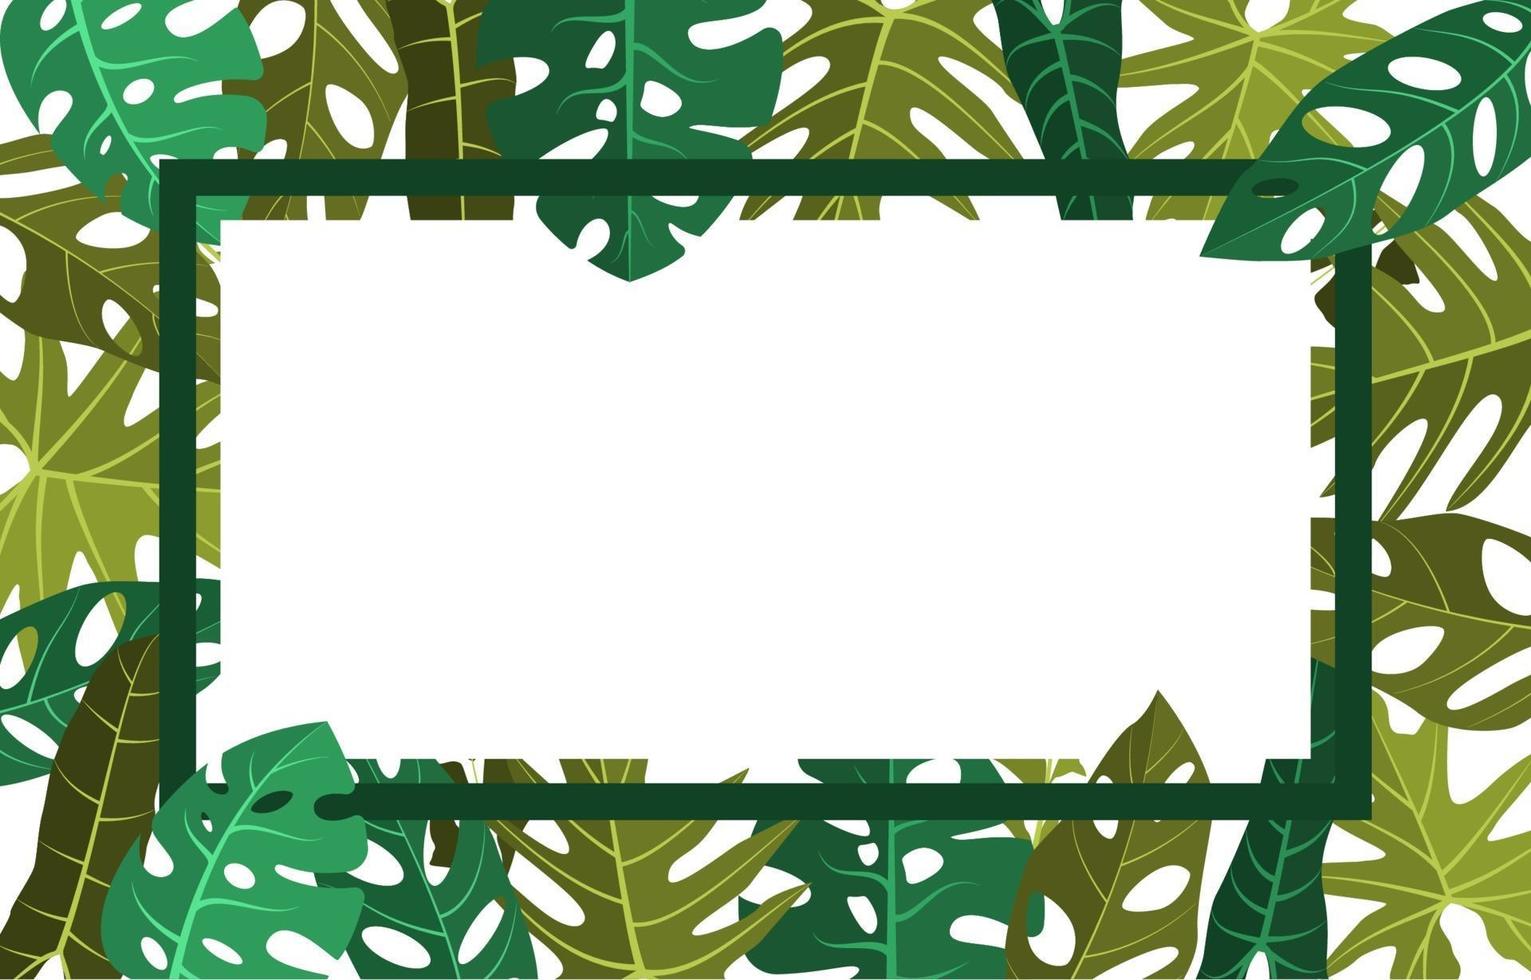 Tropical Frame Background with Monstera Leaves around Border vector